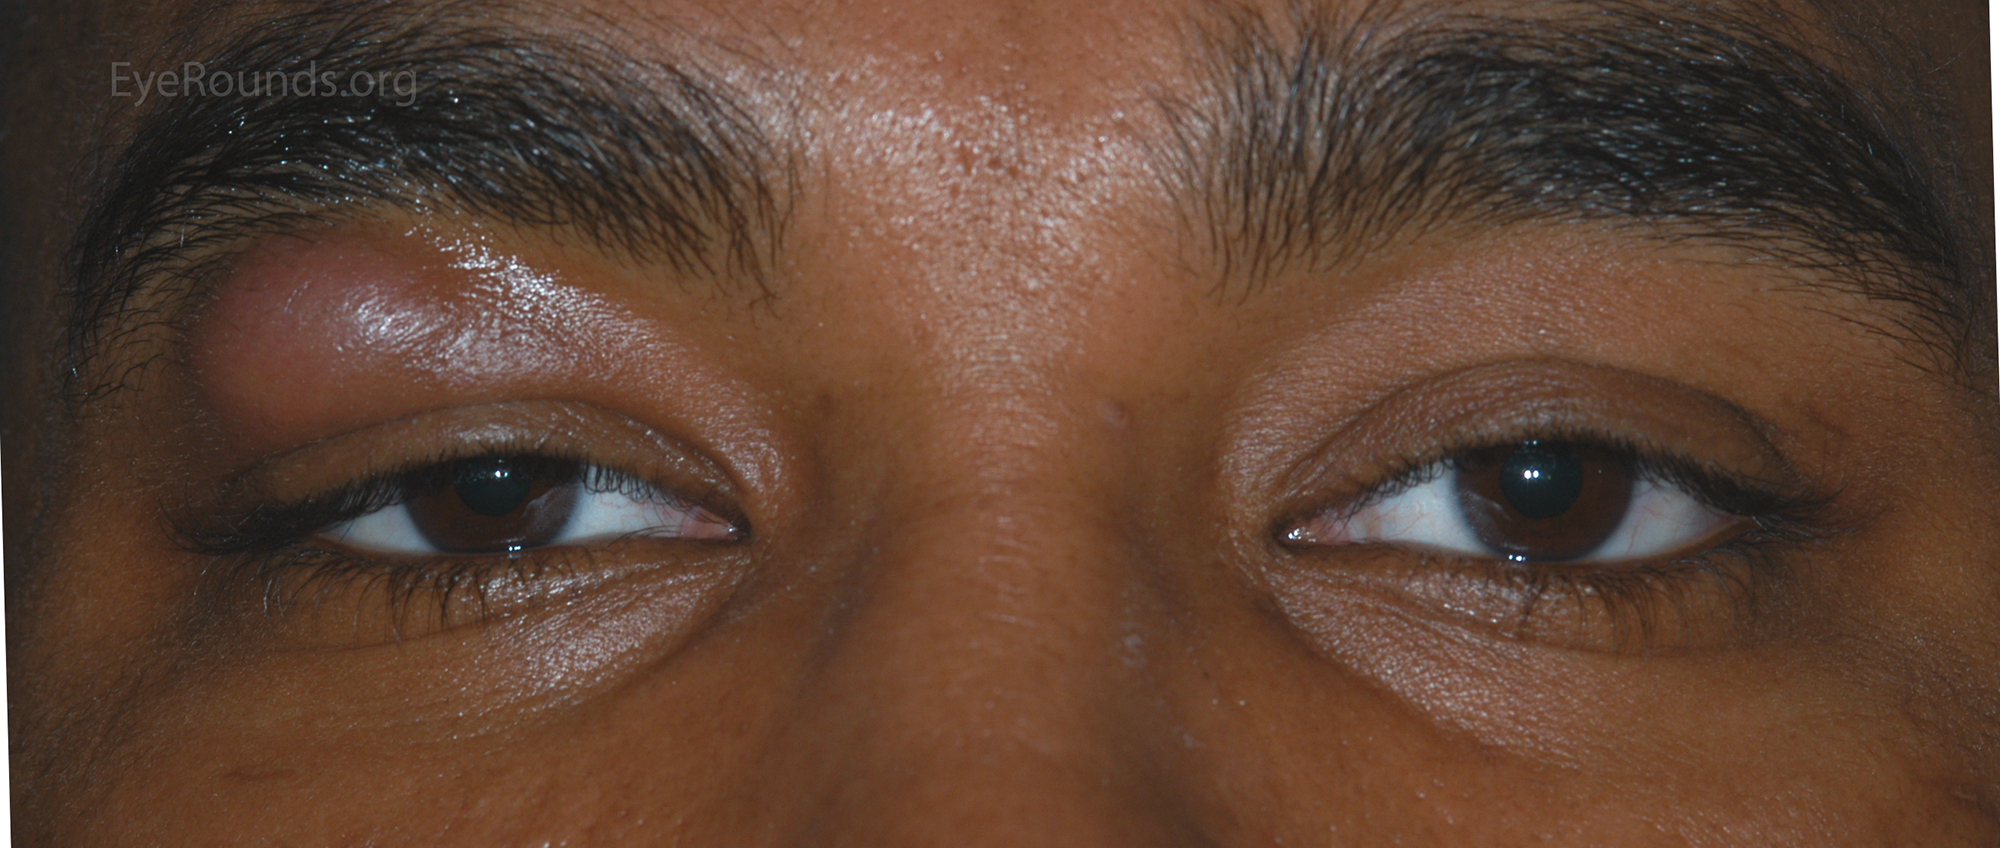 Mechanical ptosis due to granulomatous inflammation